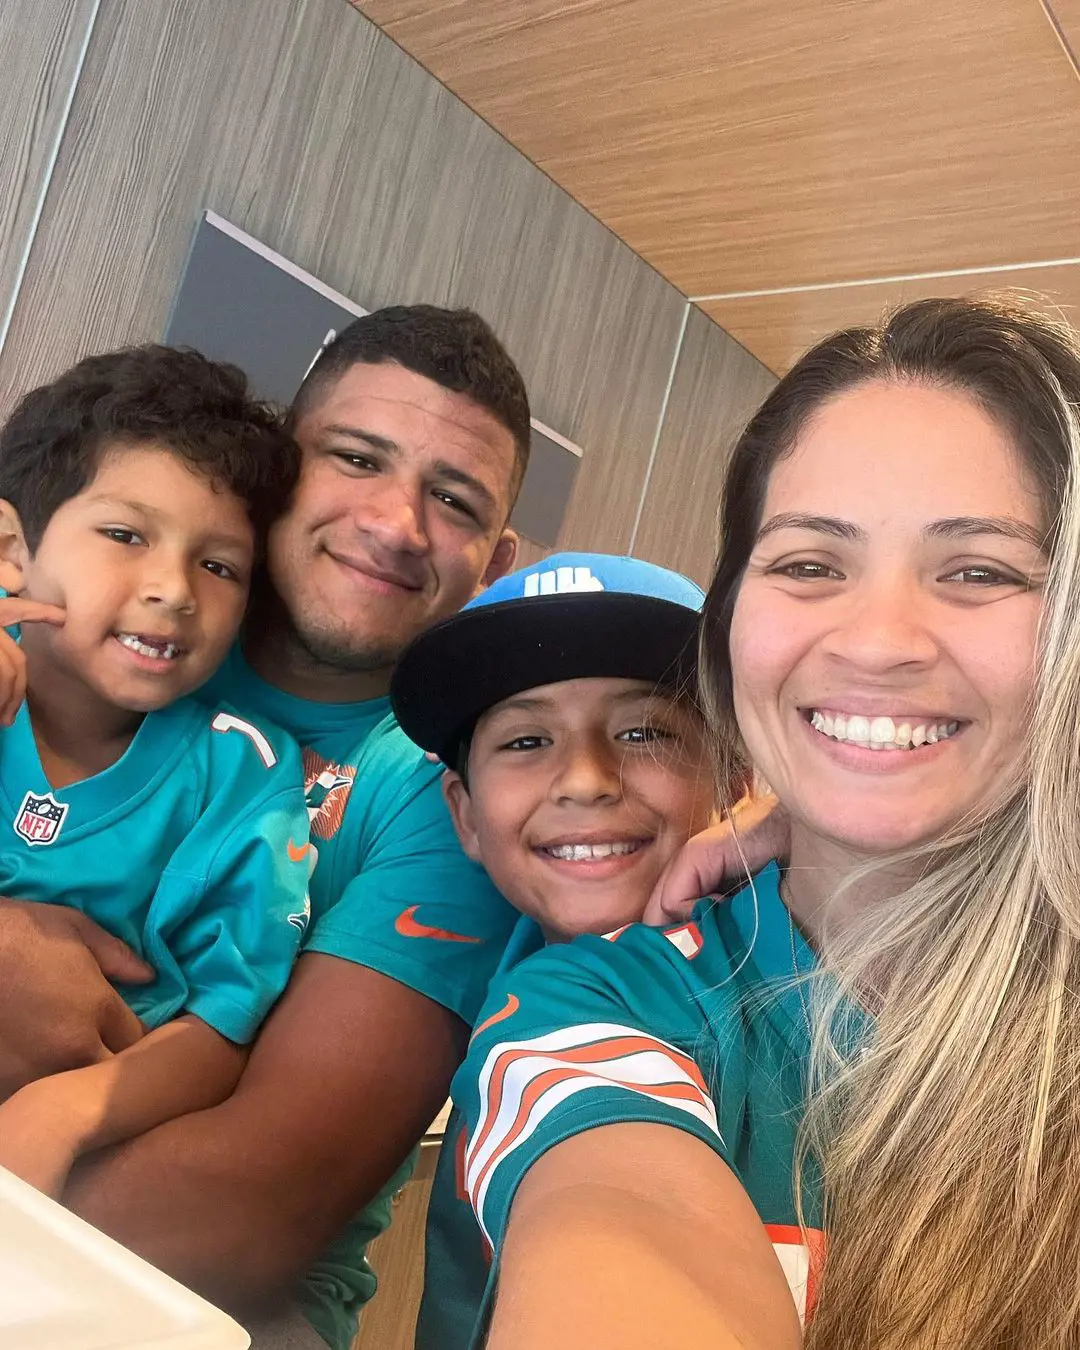 Burna with her boys shows her support for the Miami Dolphins as they visit the stadium in October 2022